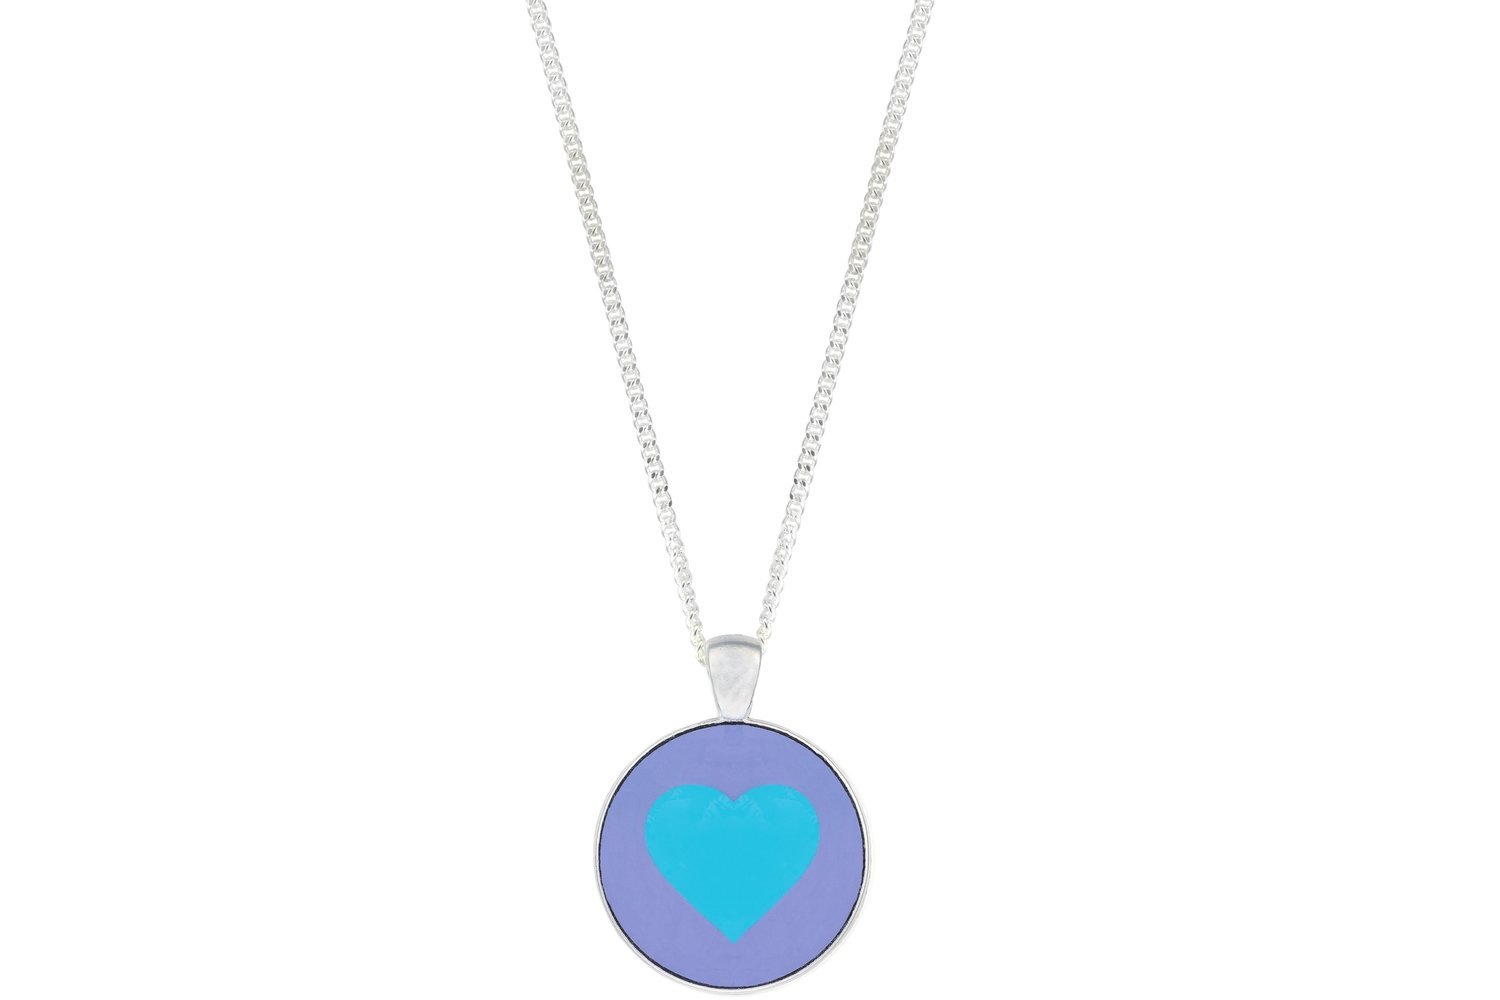 Heart Pendant Intricate Style on Chain Necklace